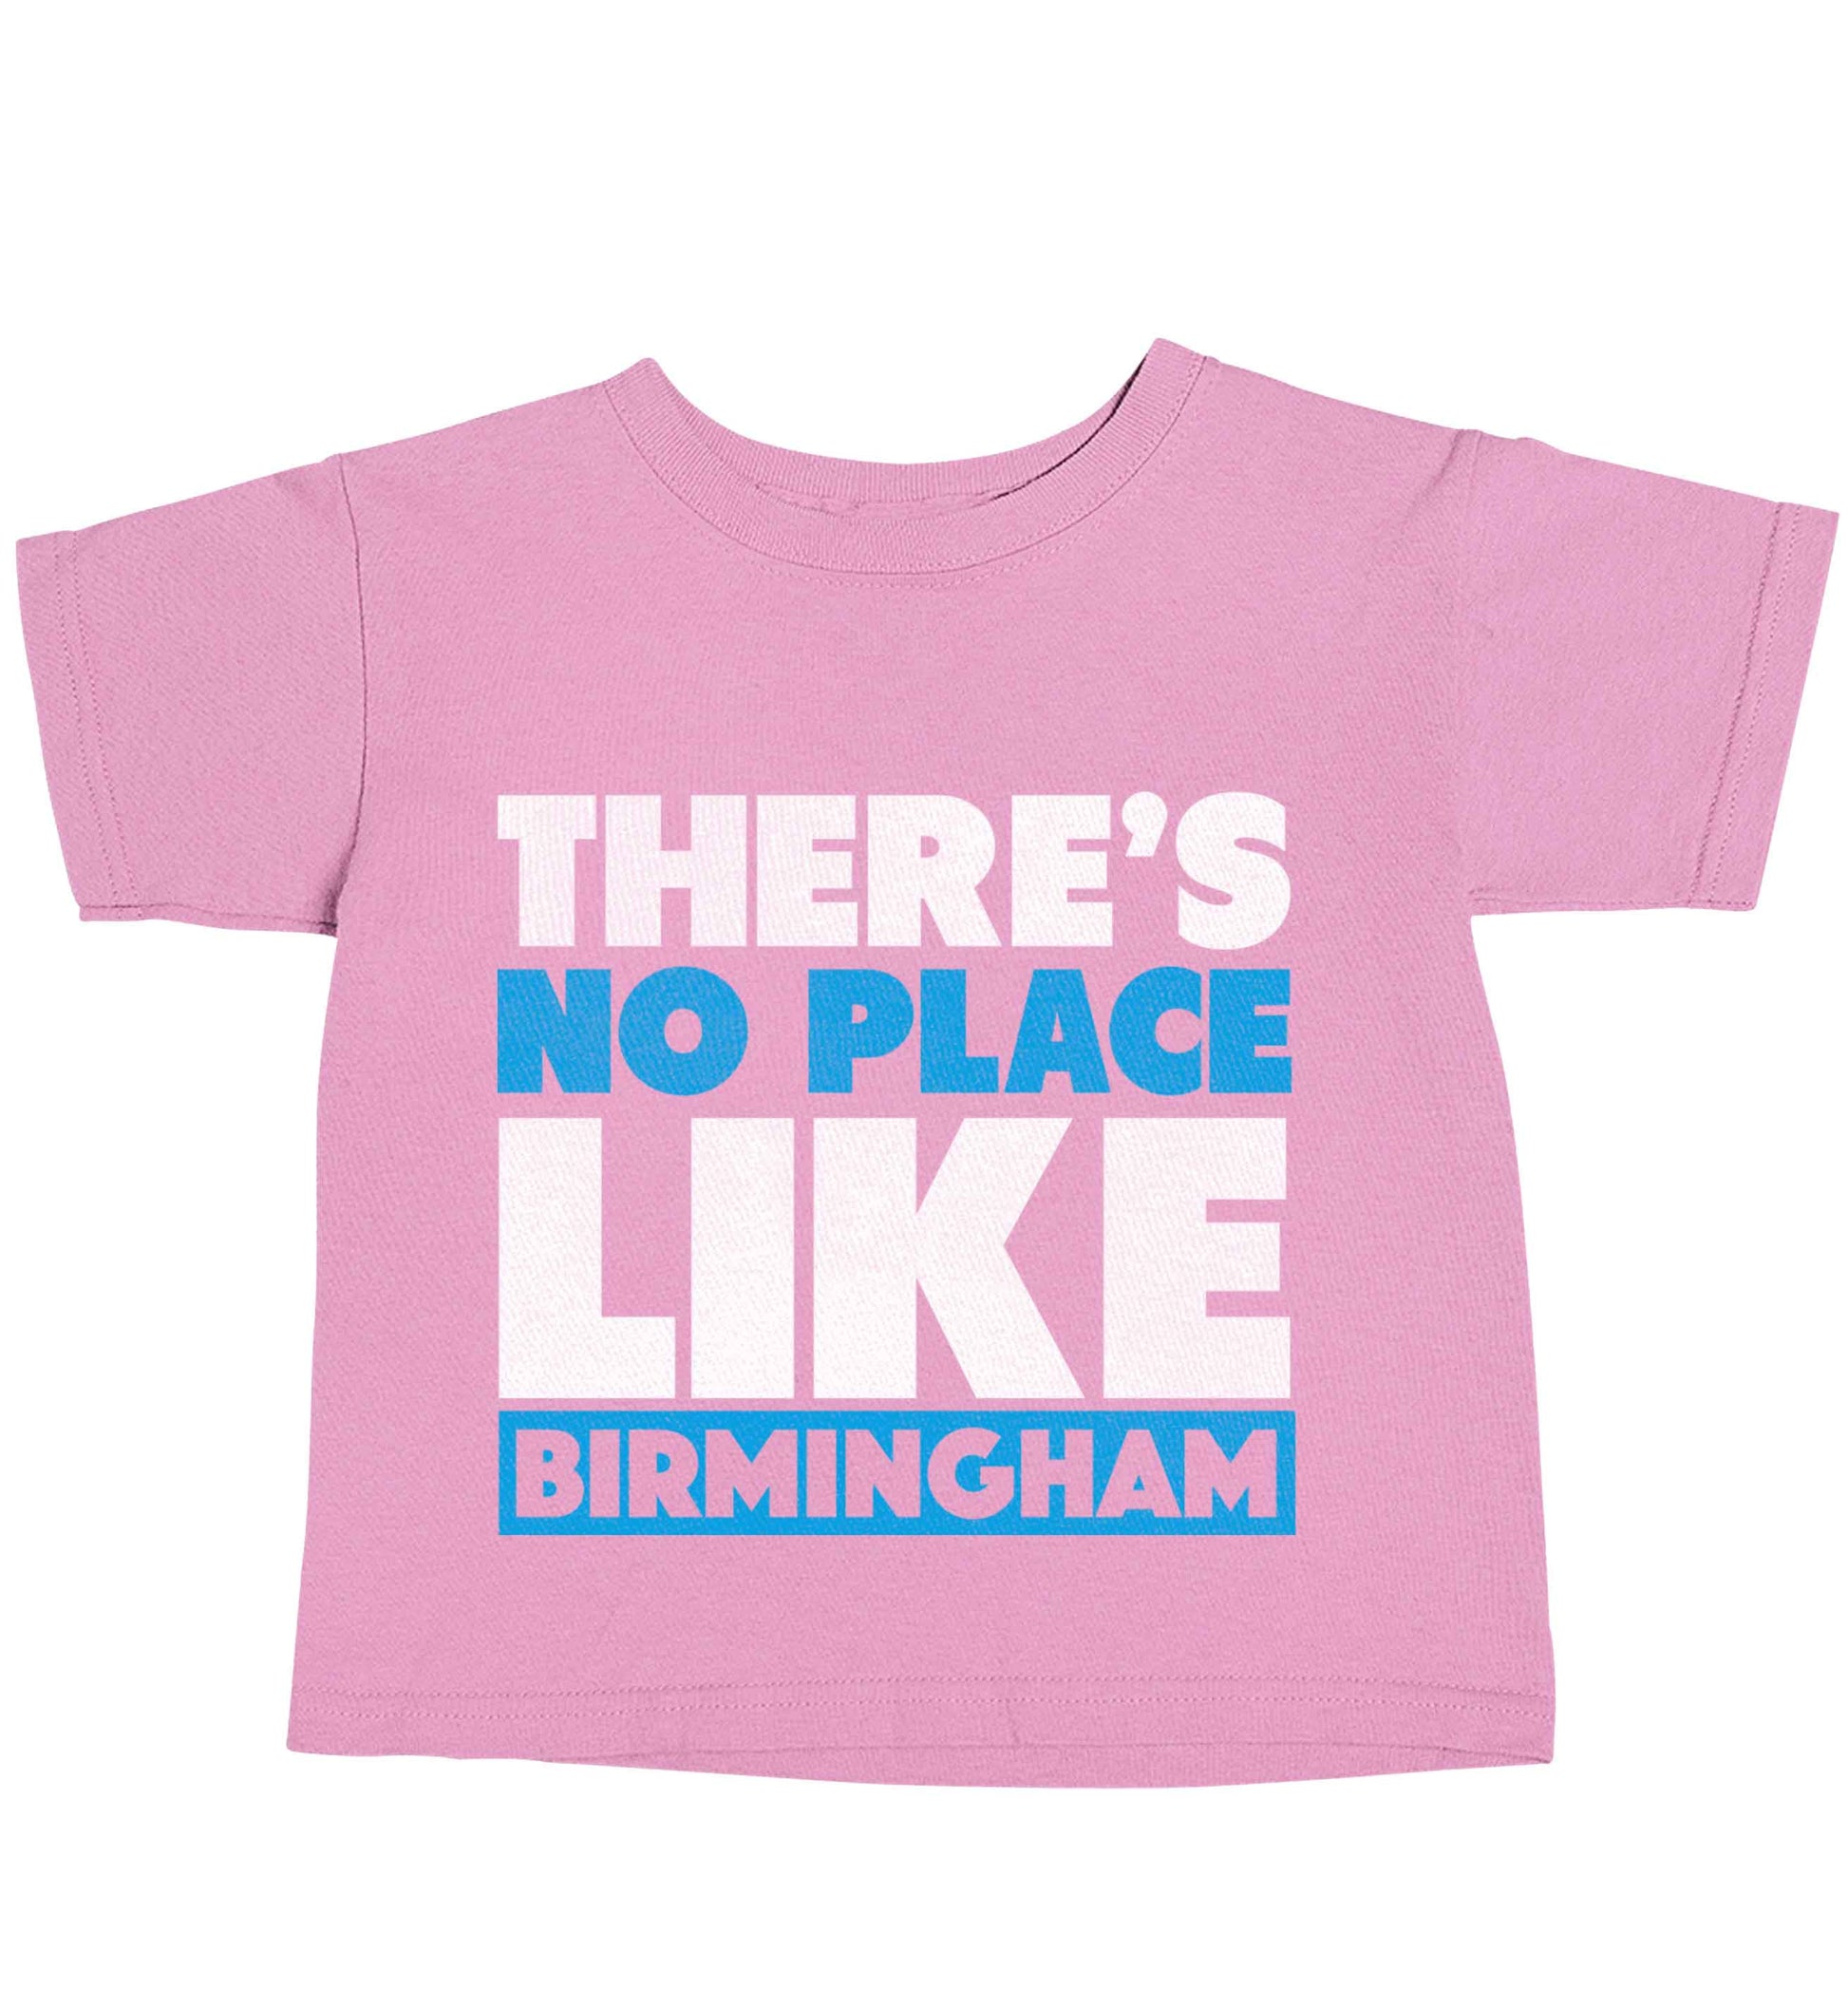 There's no place like Birmingham light pink baby toddler Tshirt 2 Years